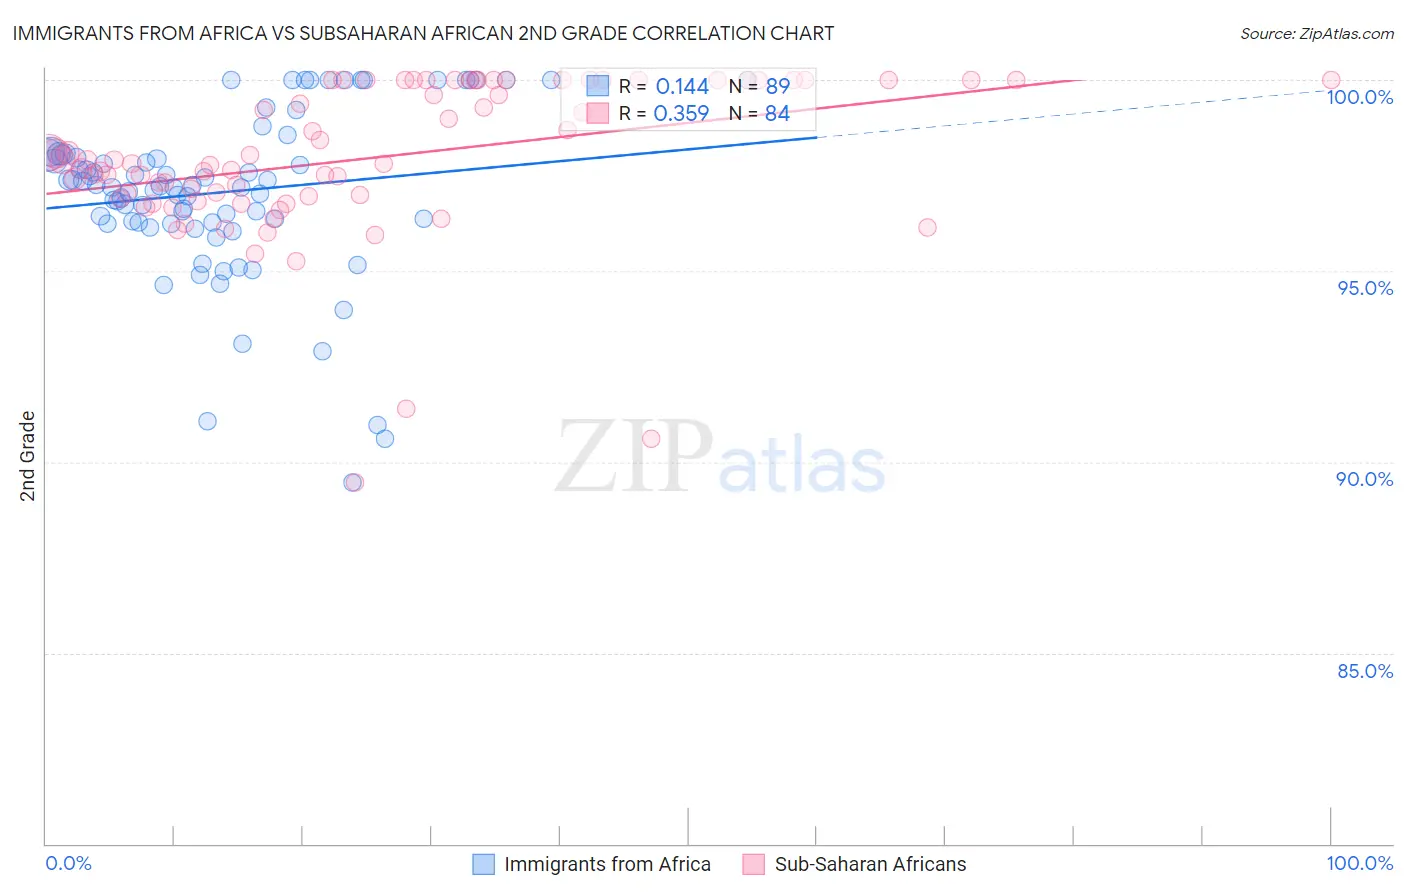 Immigrants from Africa vs Subsaharan African 2nd Grade